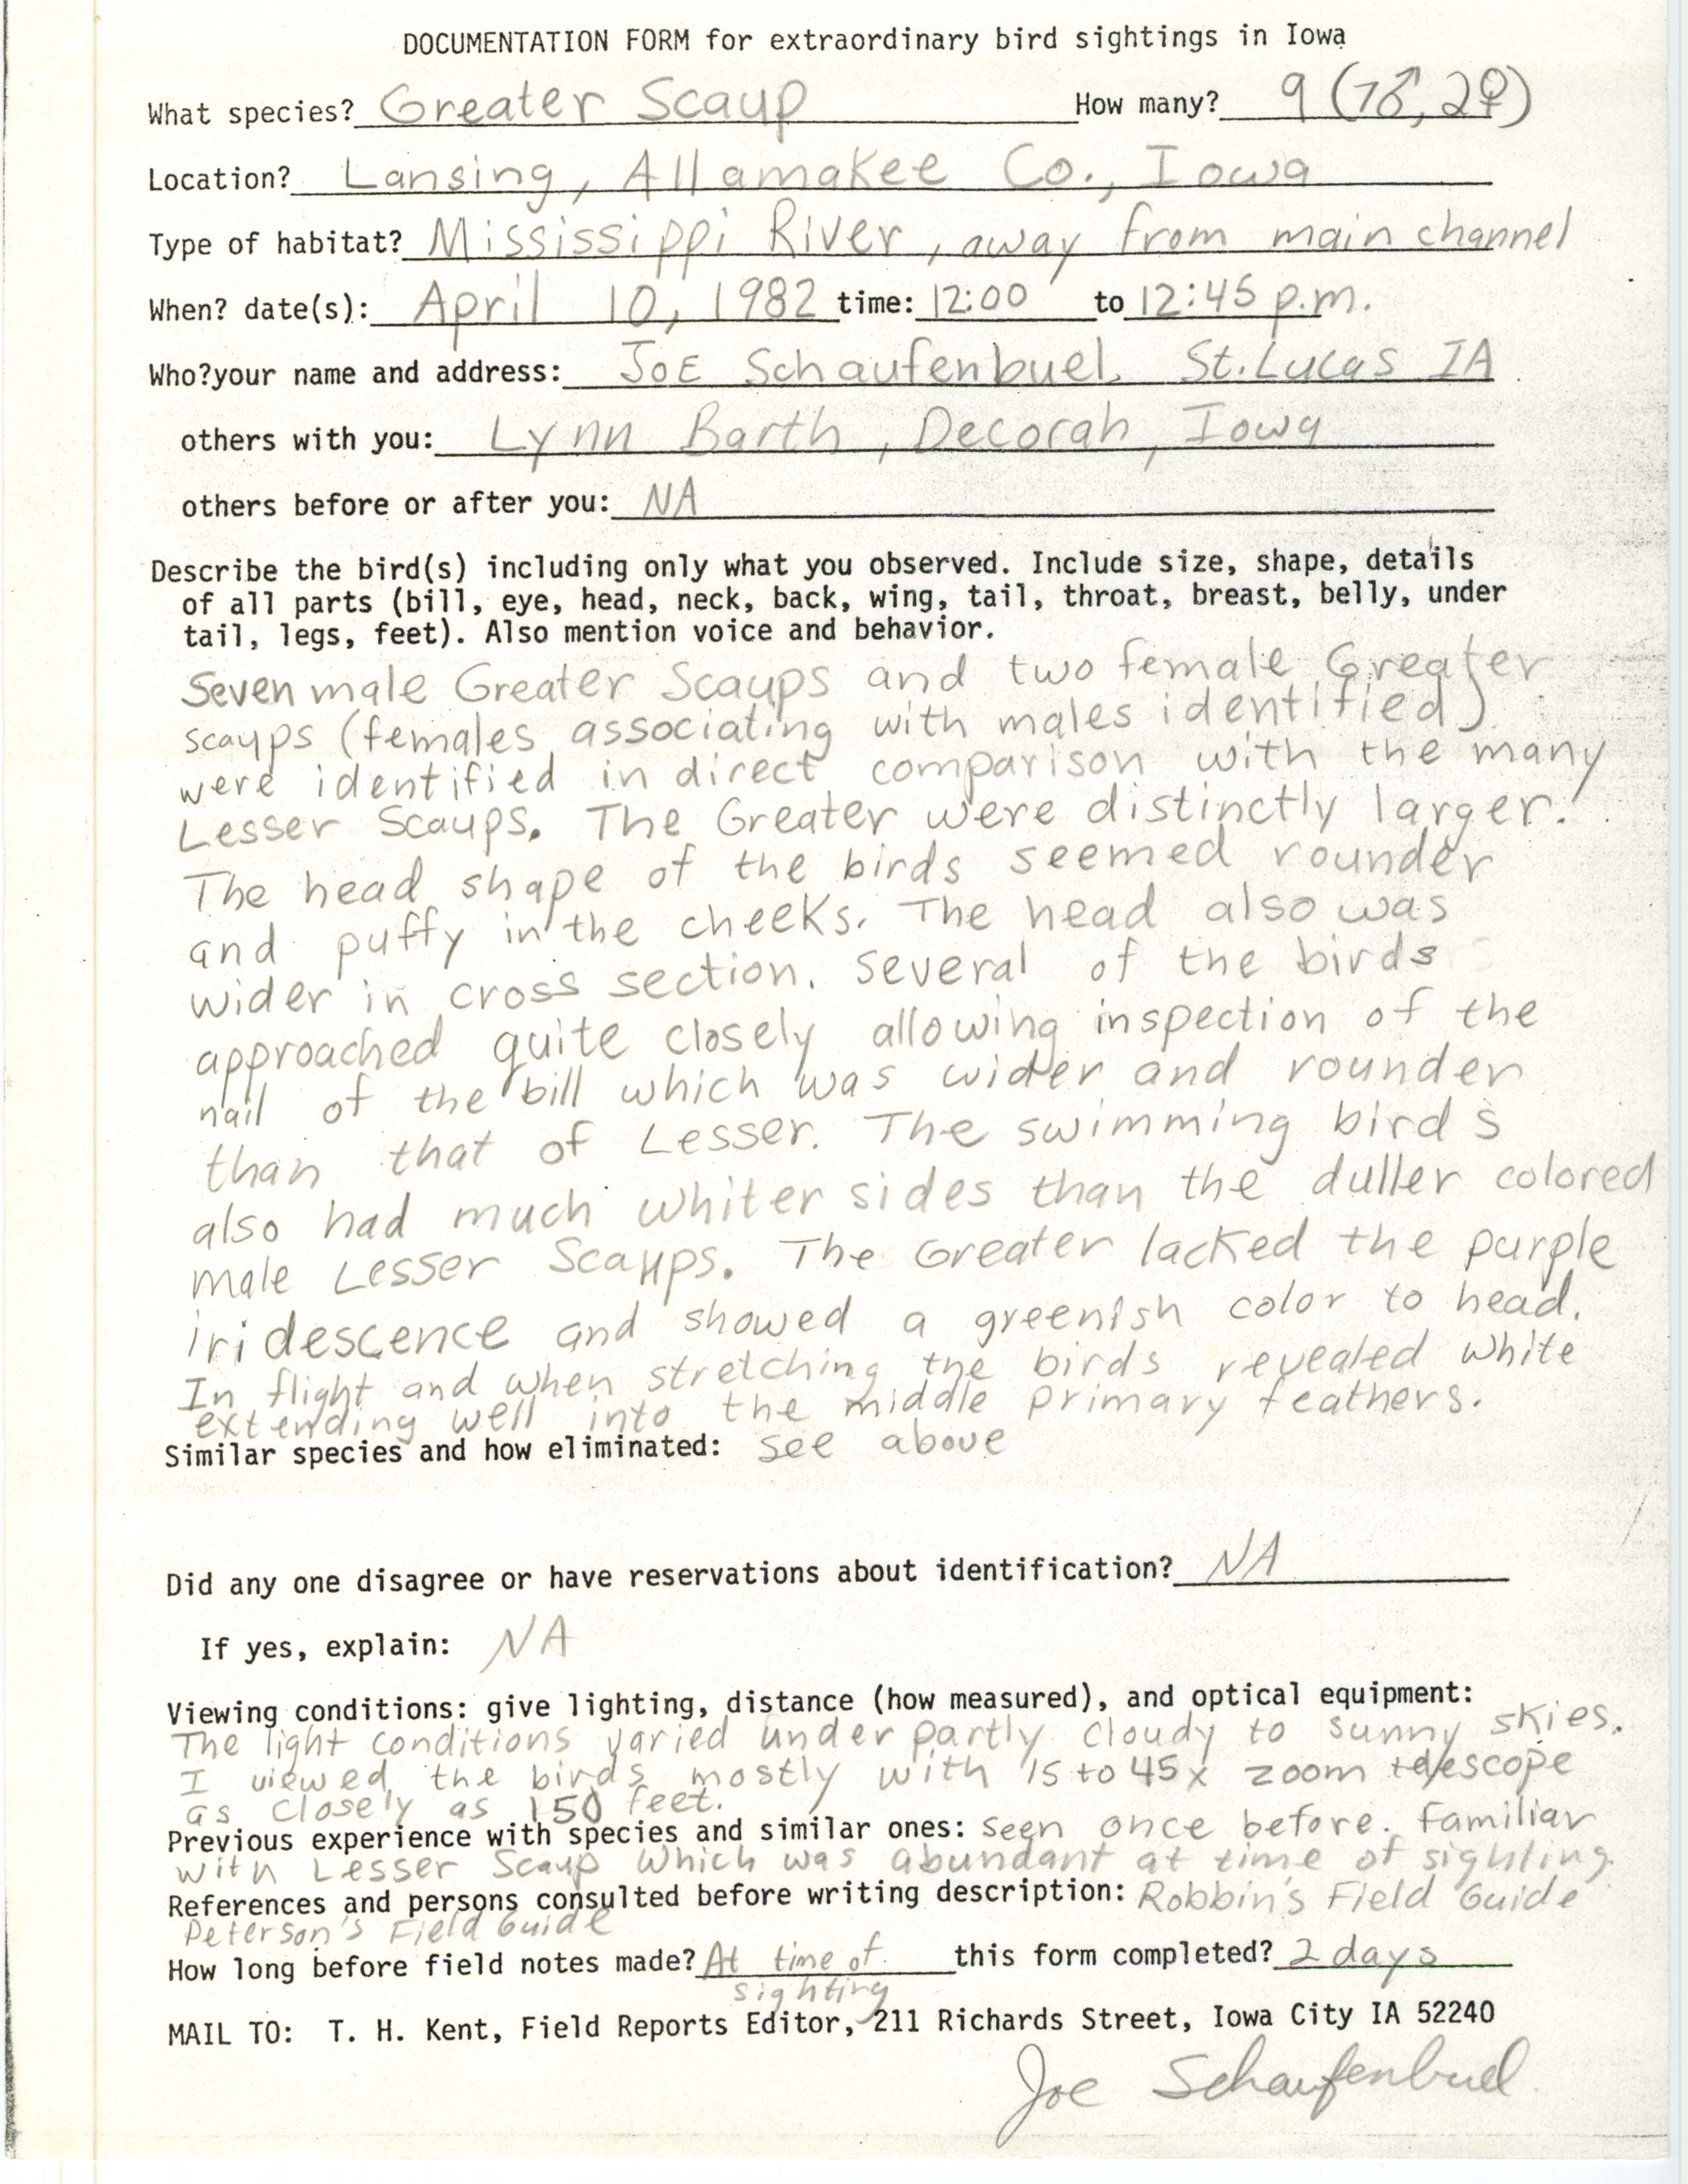 Rare bird documentation form for Greater Scaup at Lansing, 1982